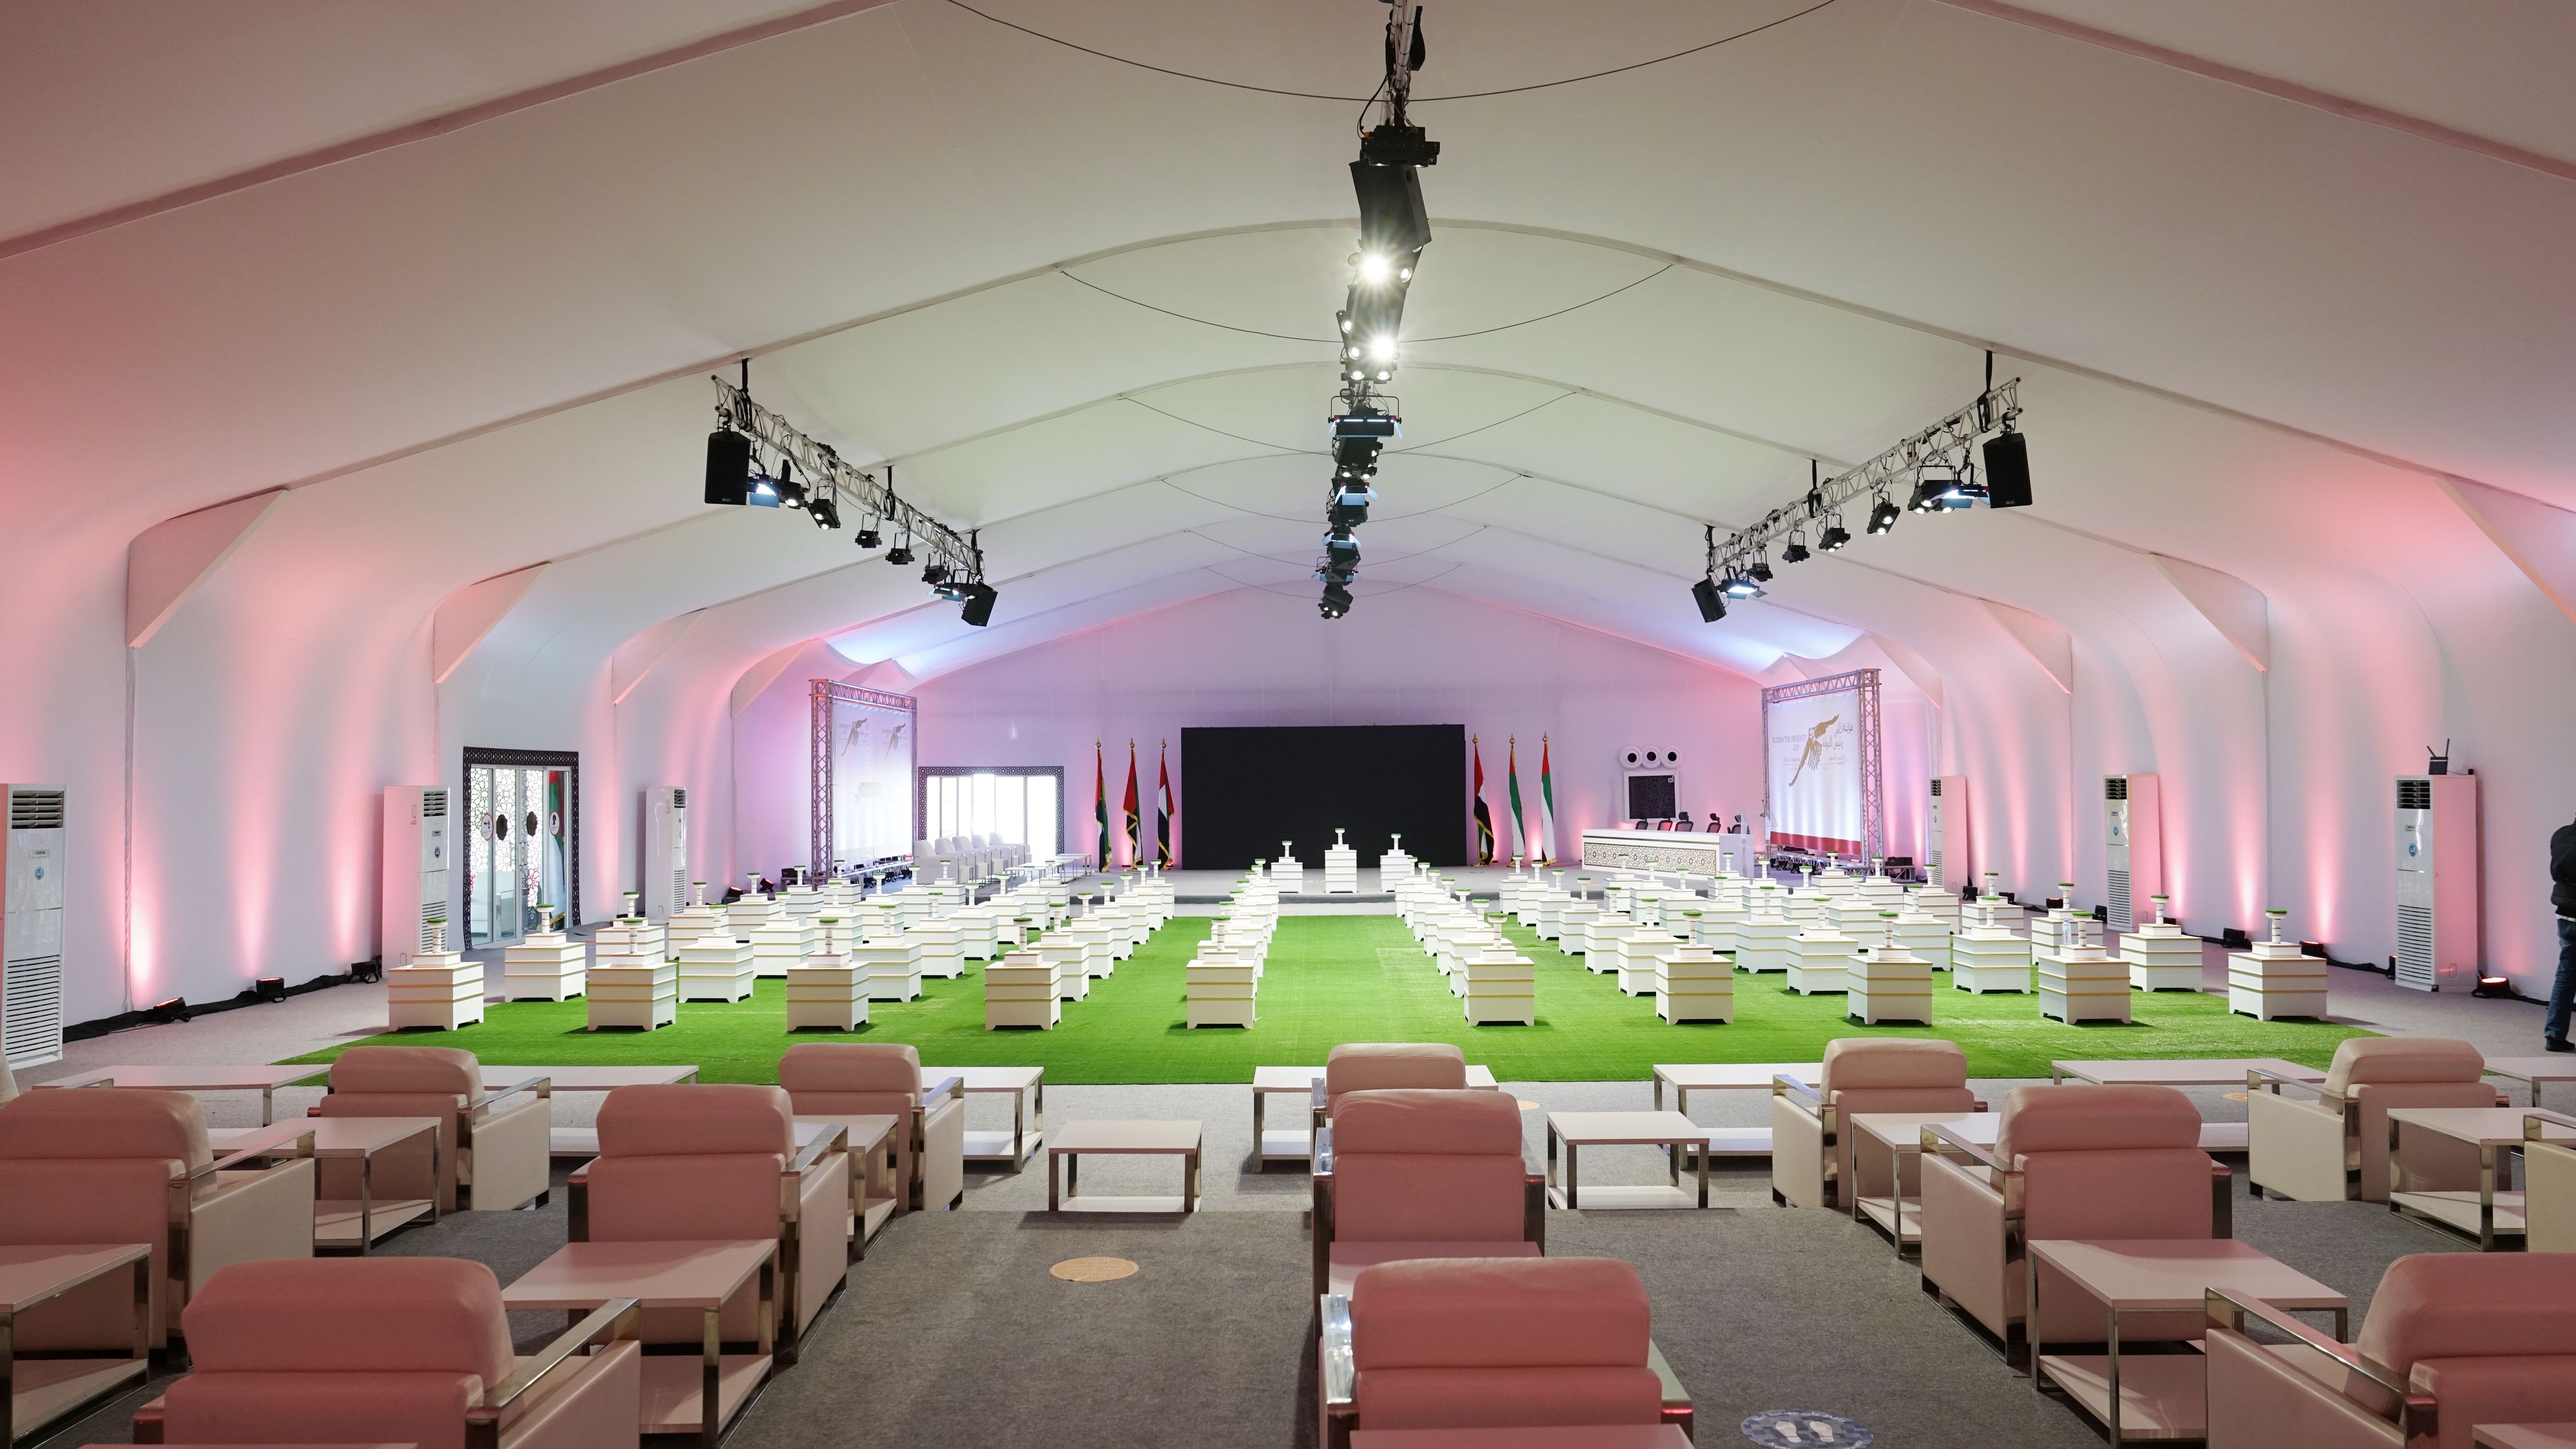 Tents & Marquees Rental and Sale-Tent Rental For Events and Exhibitions.